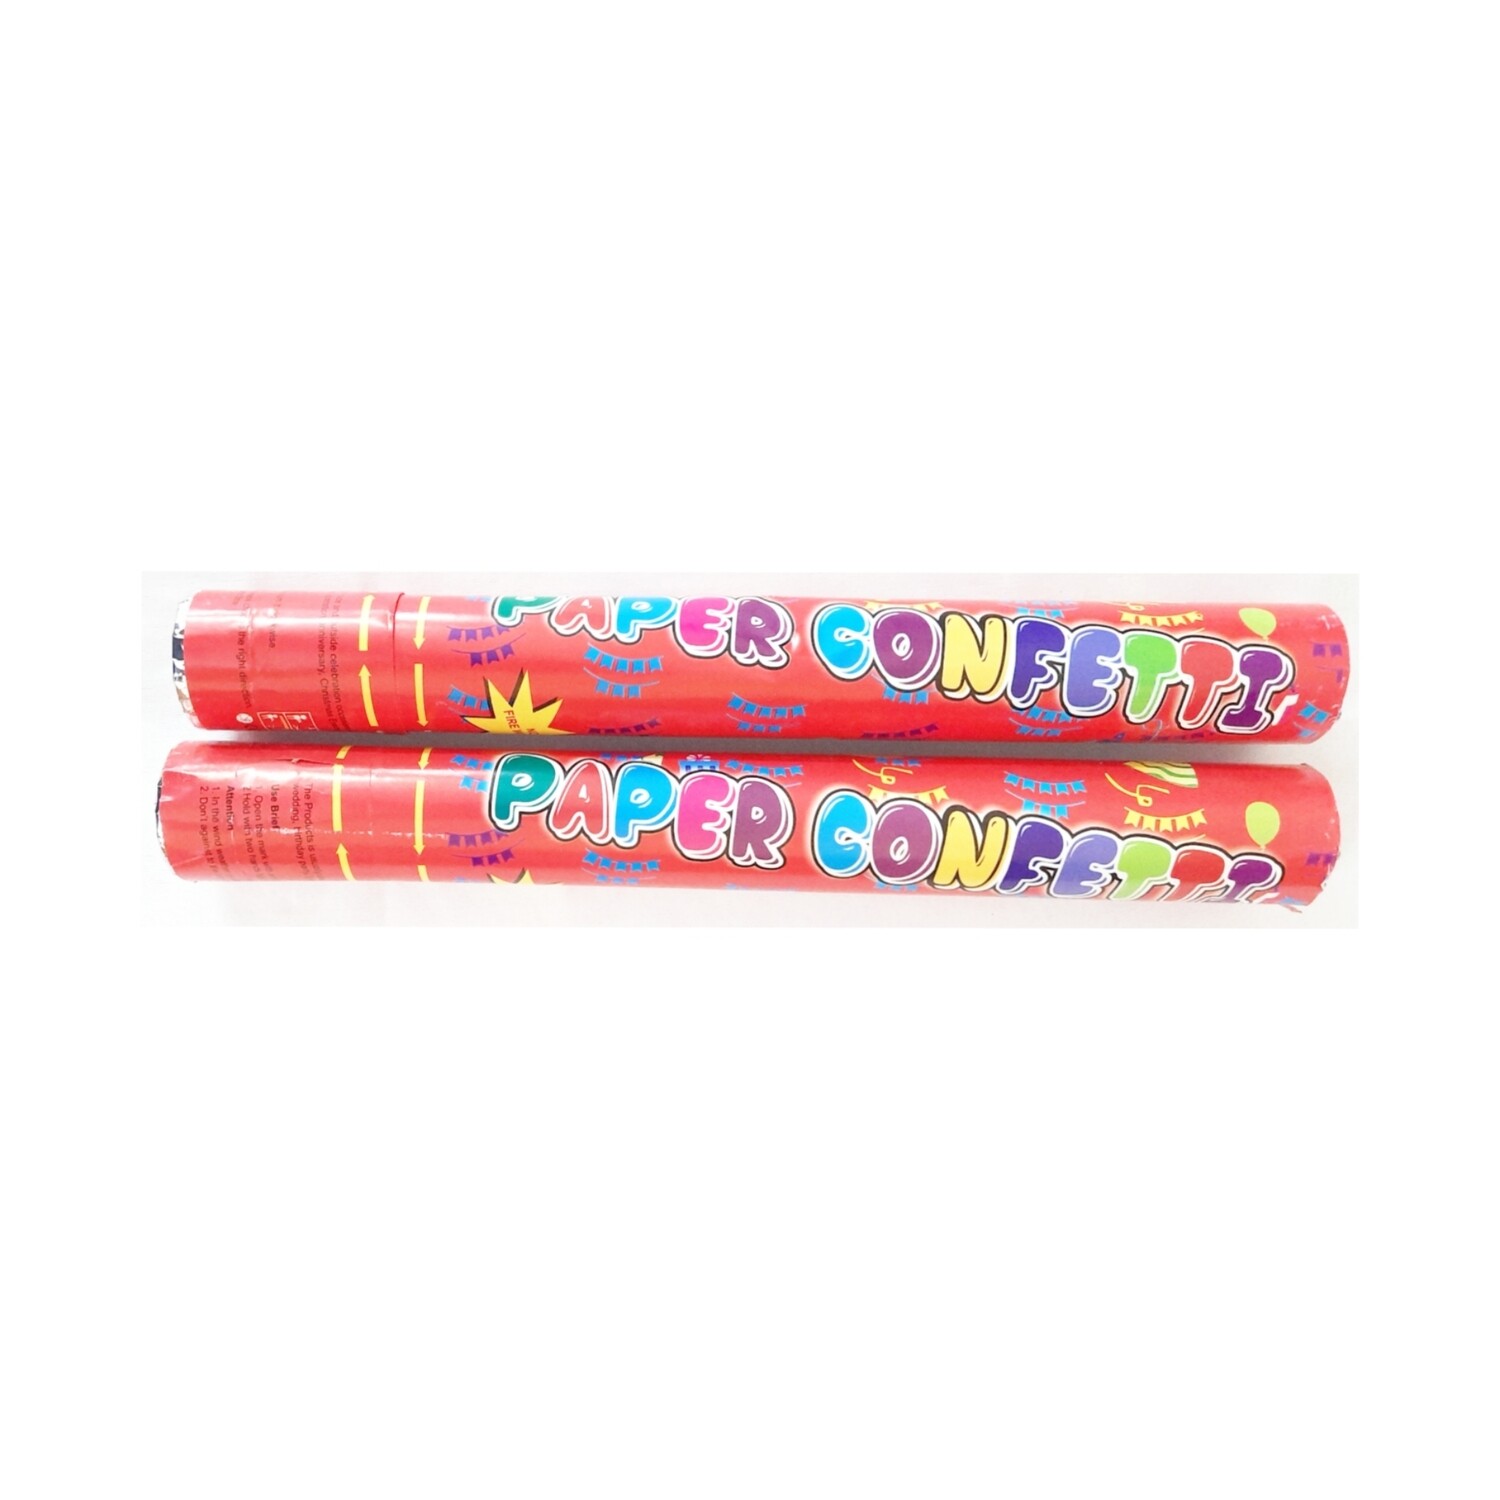 Party poppers / Paper Confetti (40cm)